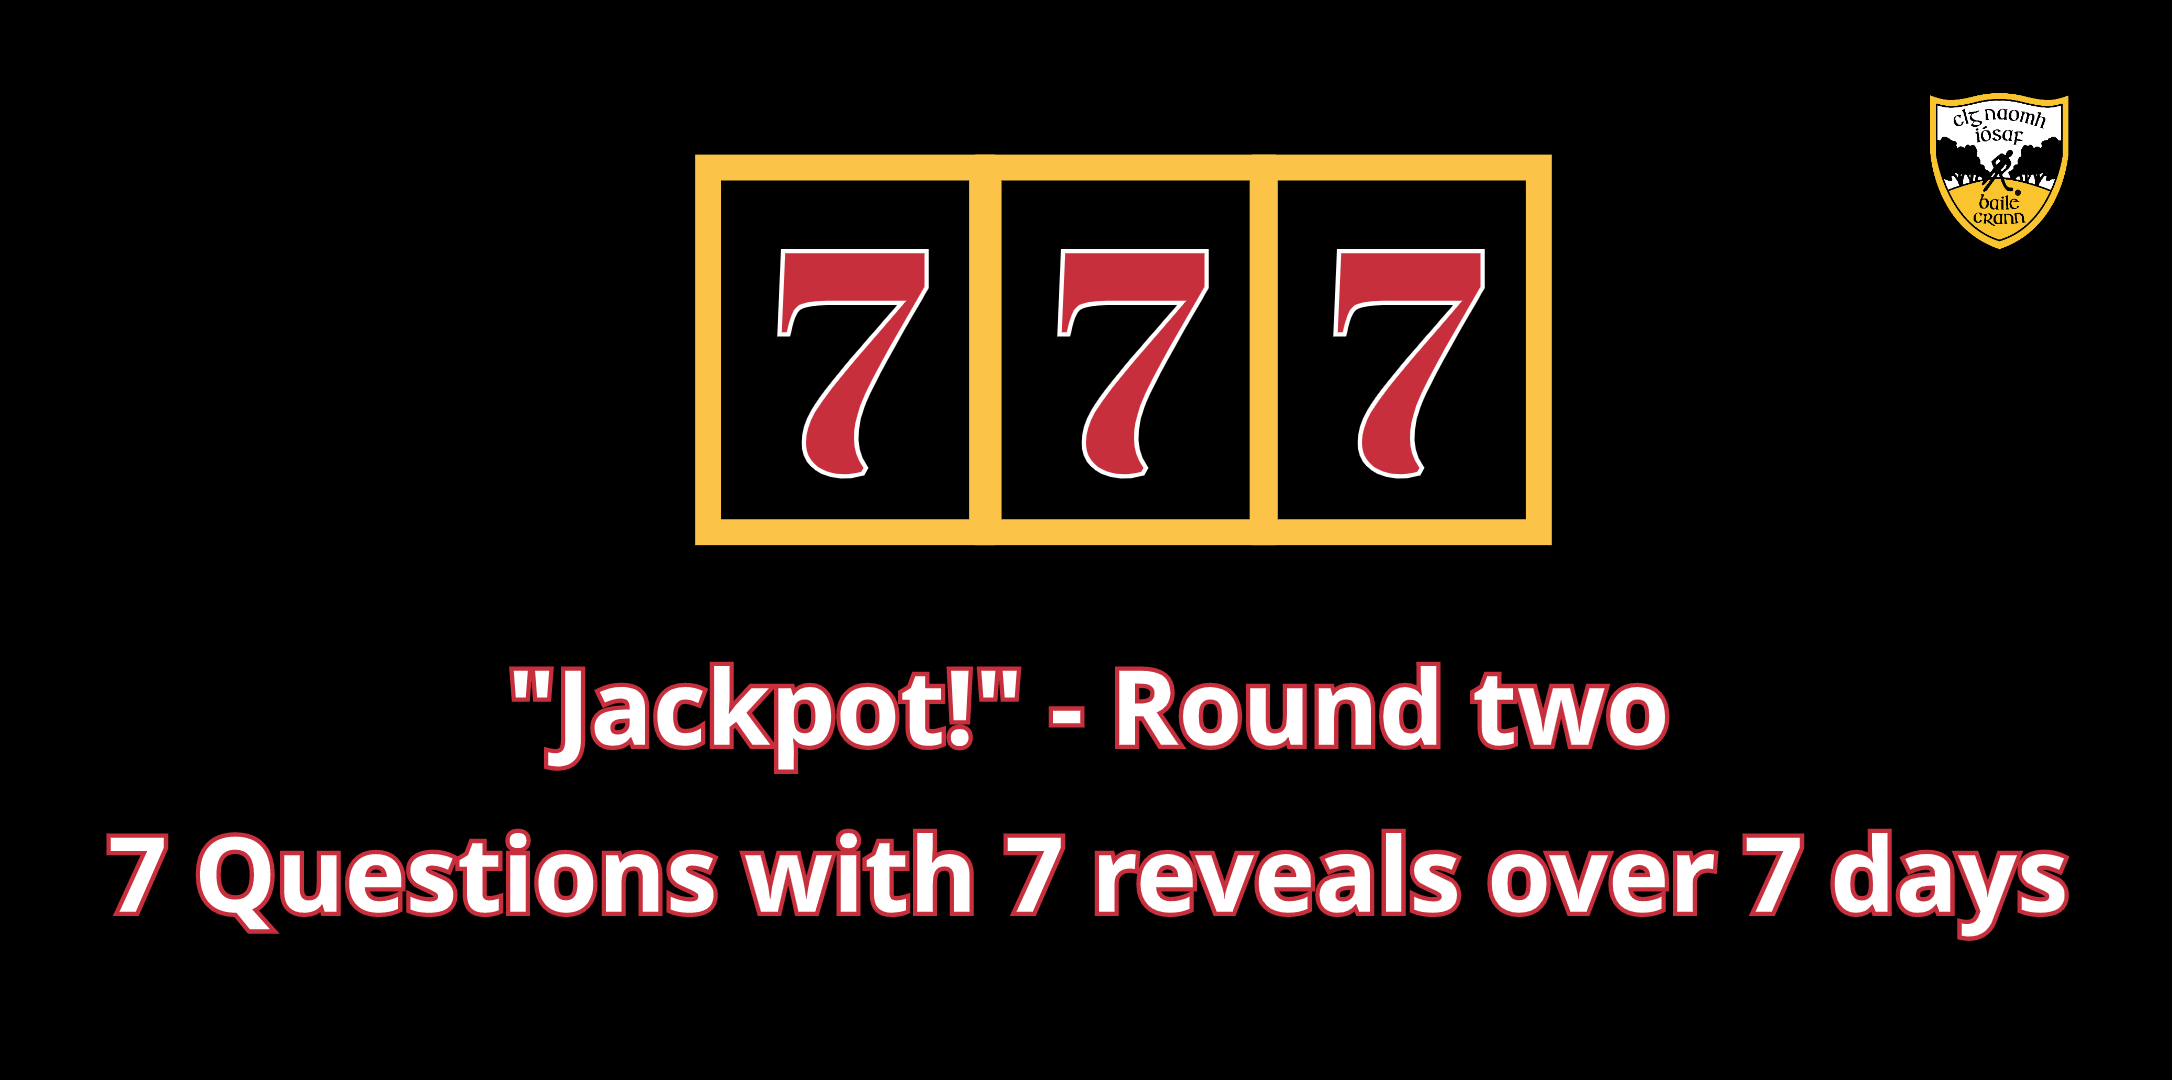 Round two of our popular Jackpot! game concluded tonight and here’s the summary